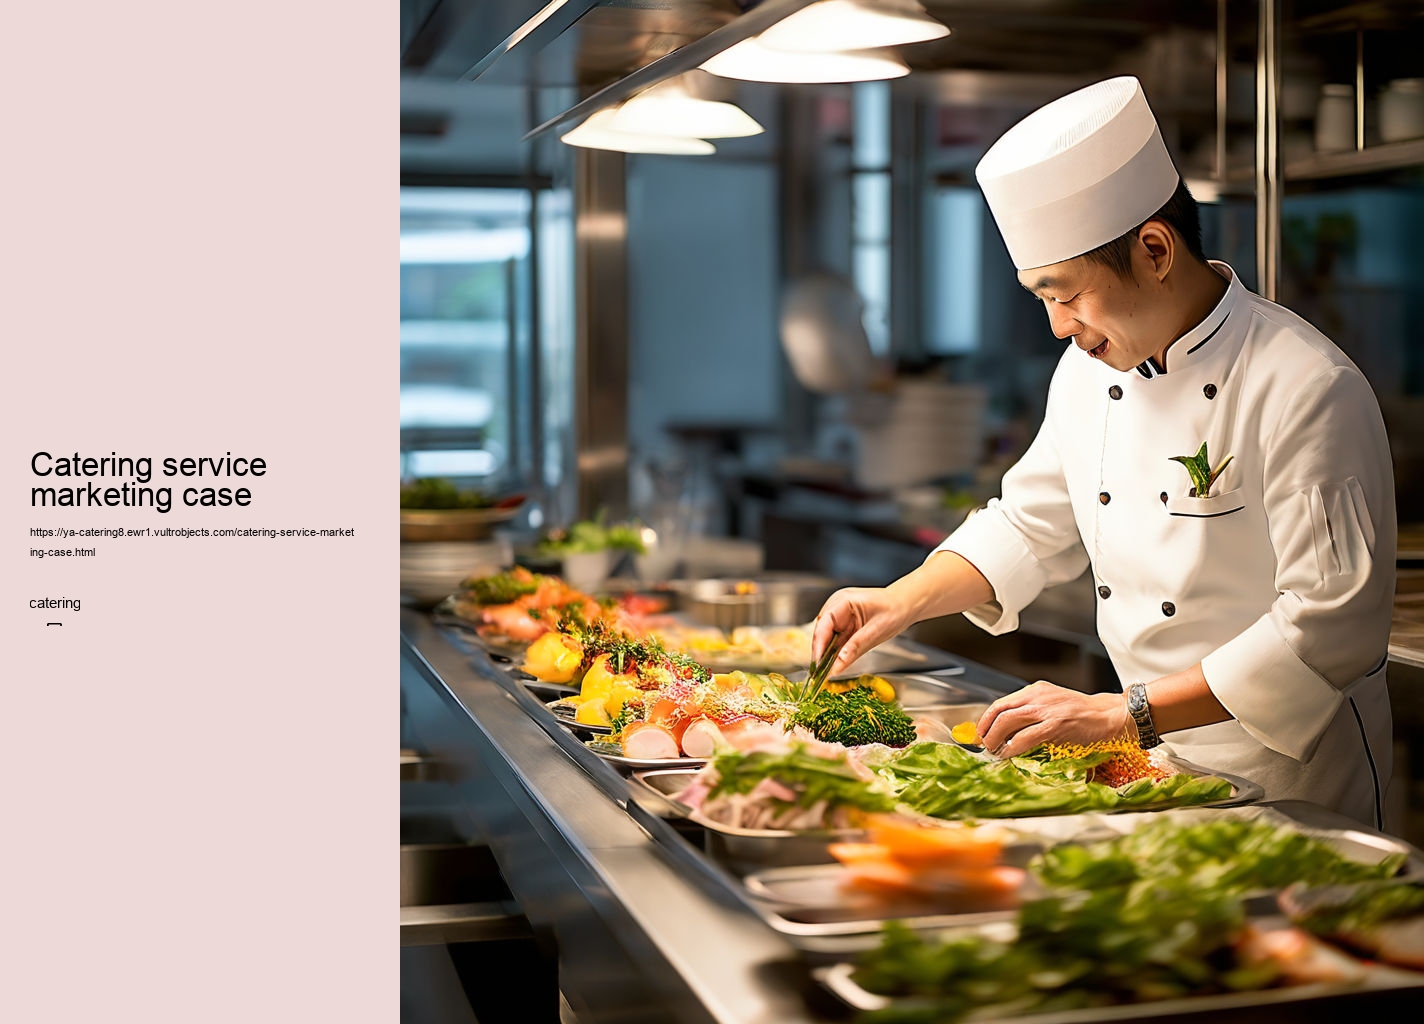 Catering service marketing case